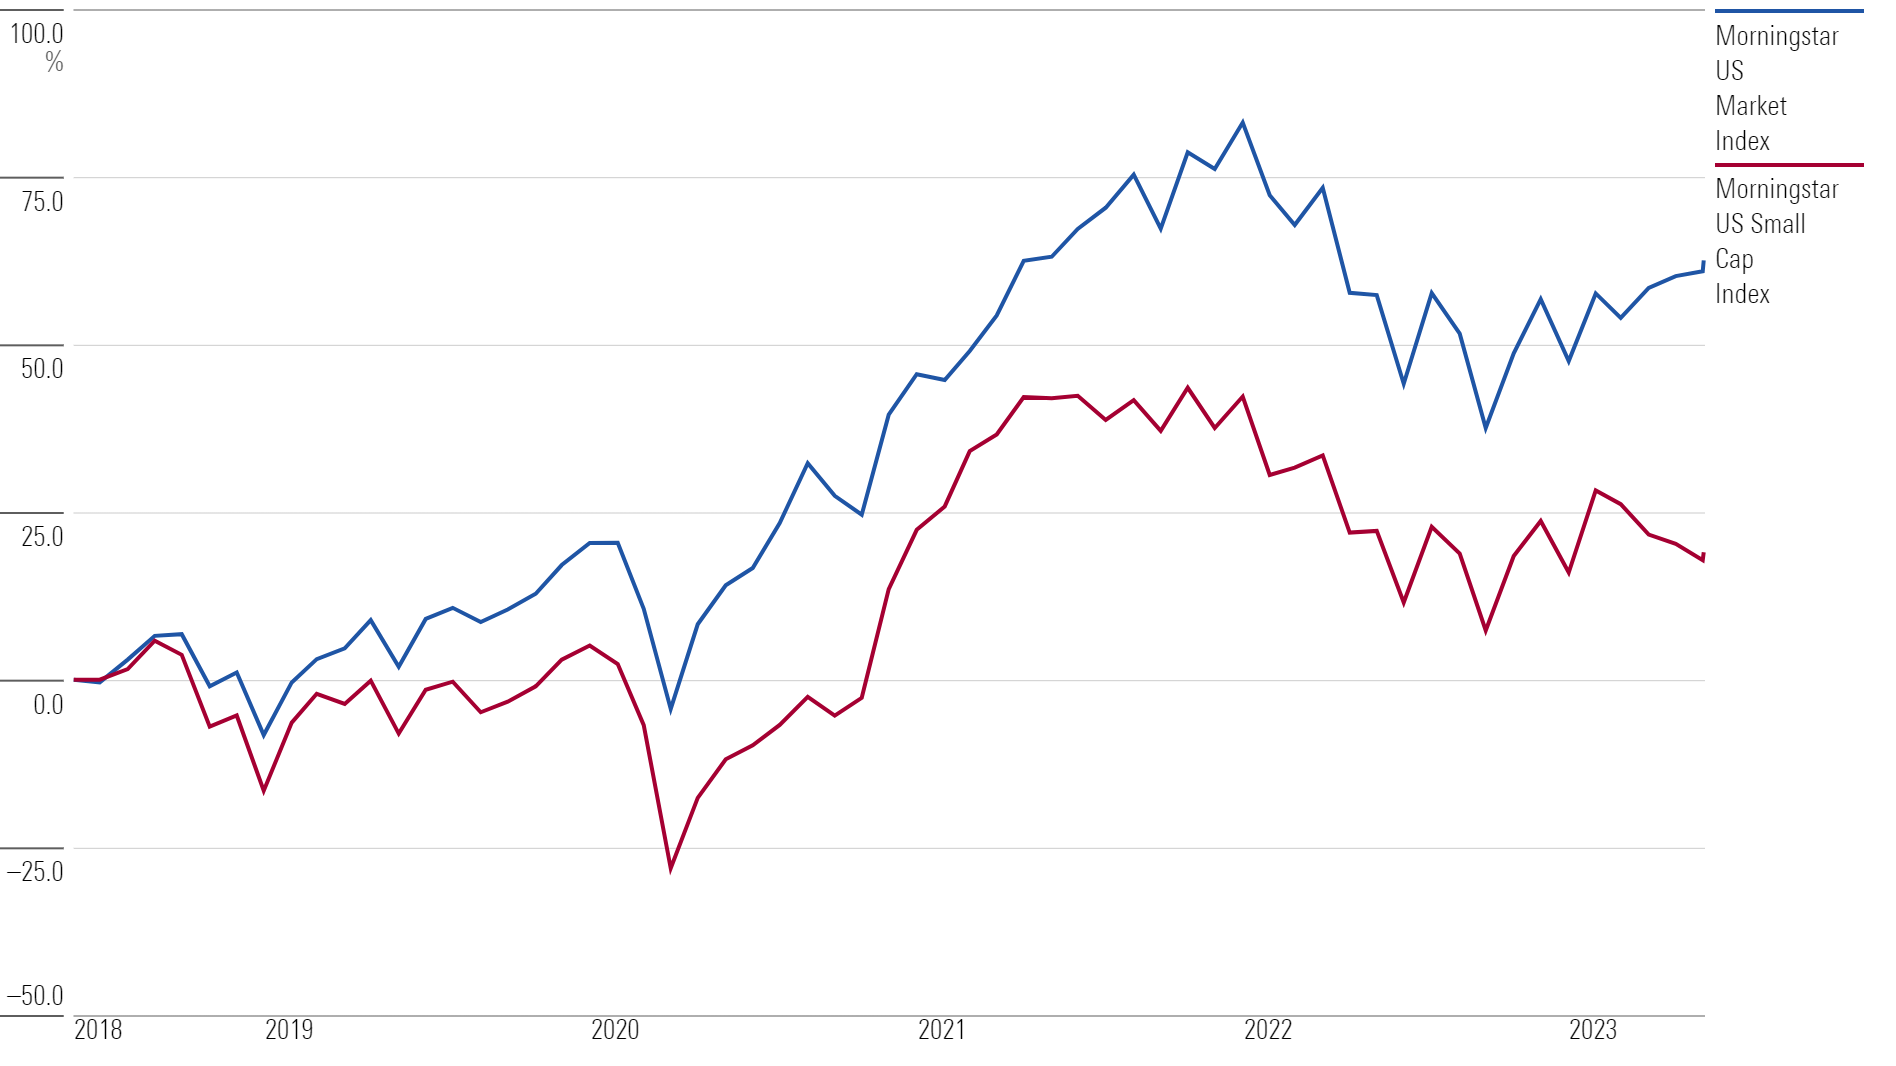 A line chart showing the performance of the Morningstar US Market Index and Morningstar US Small Cap Index.